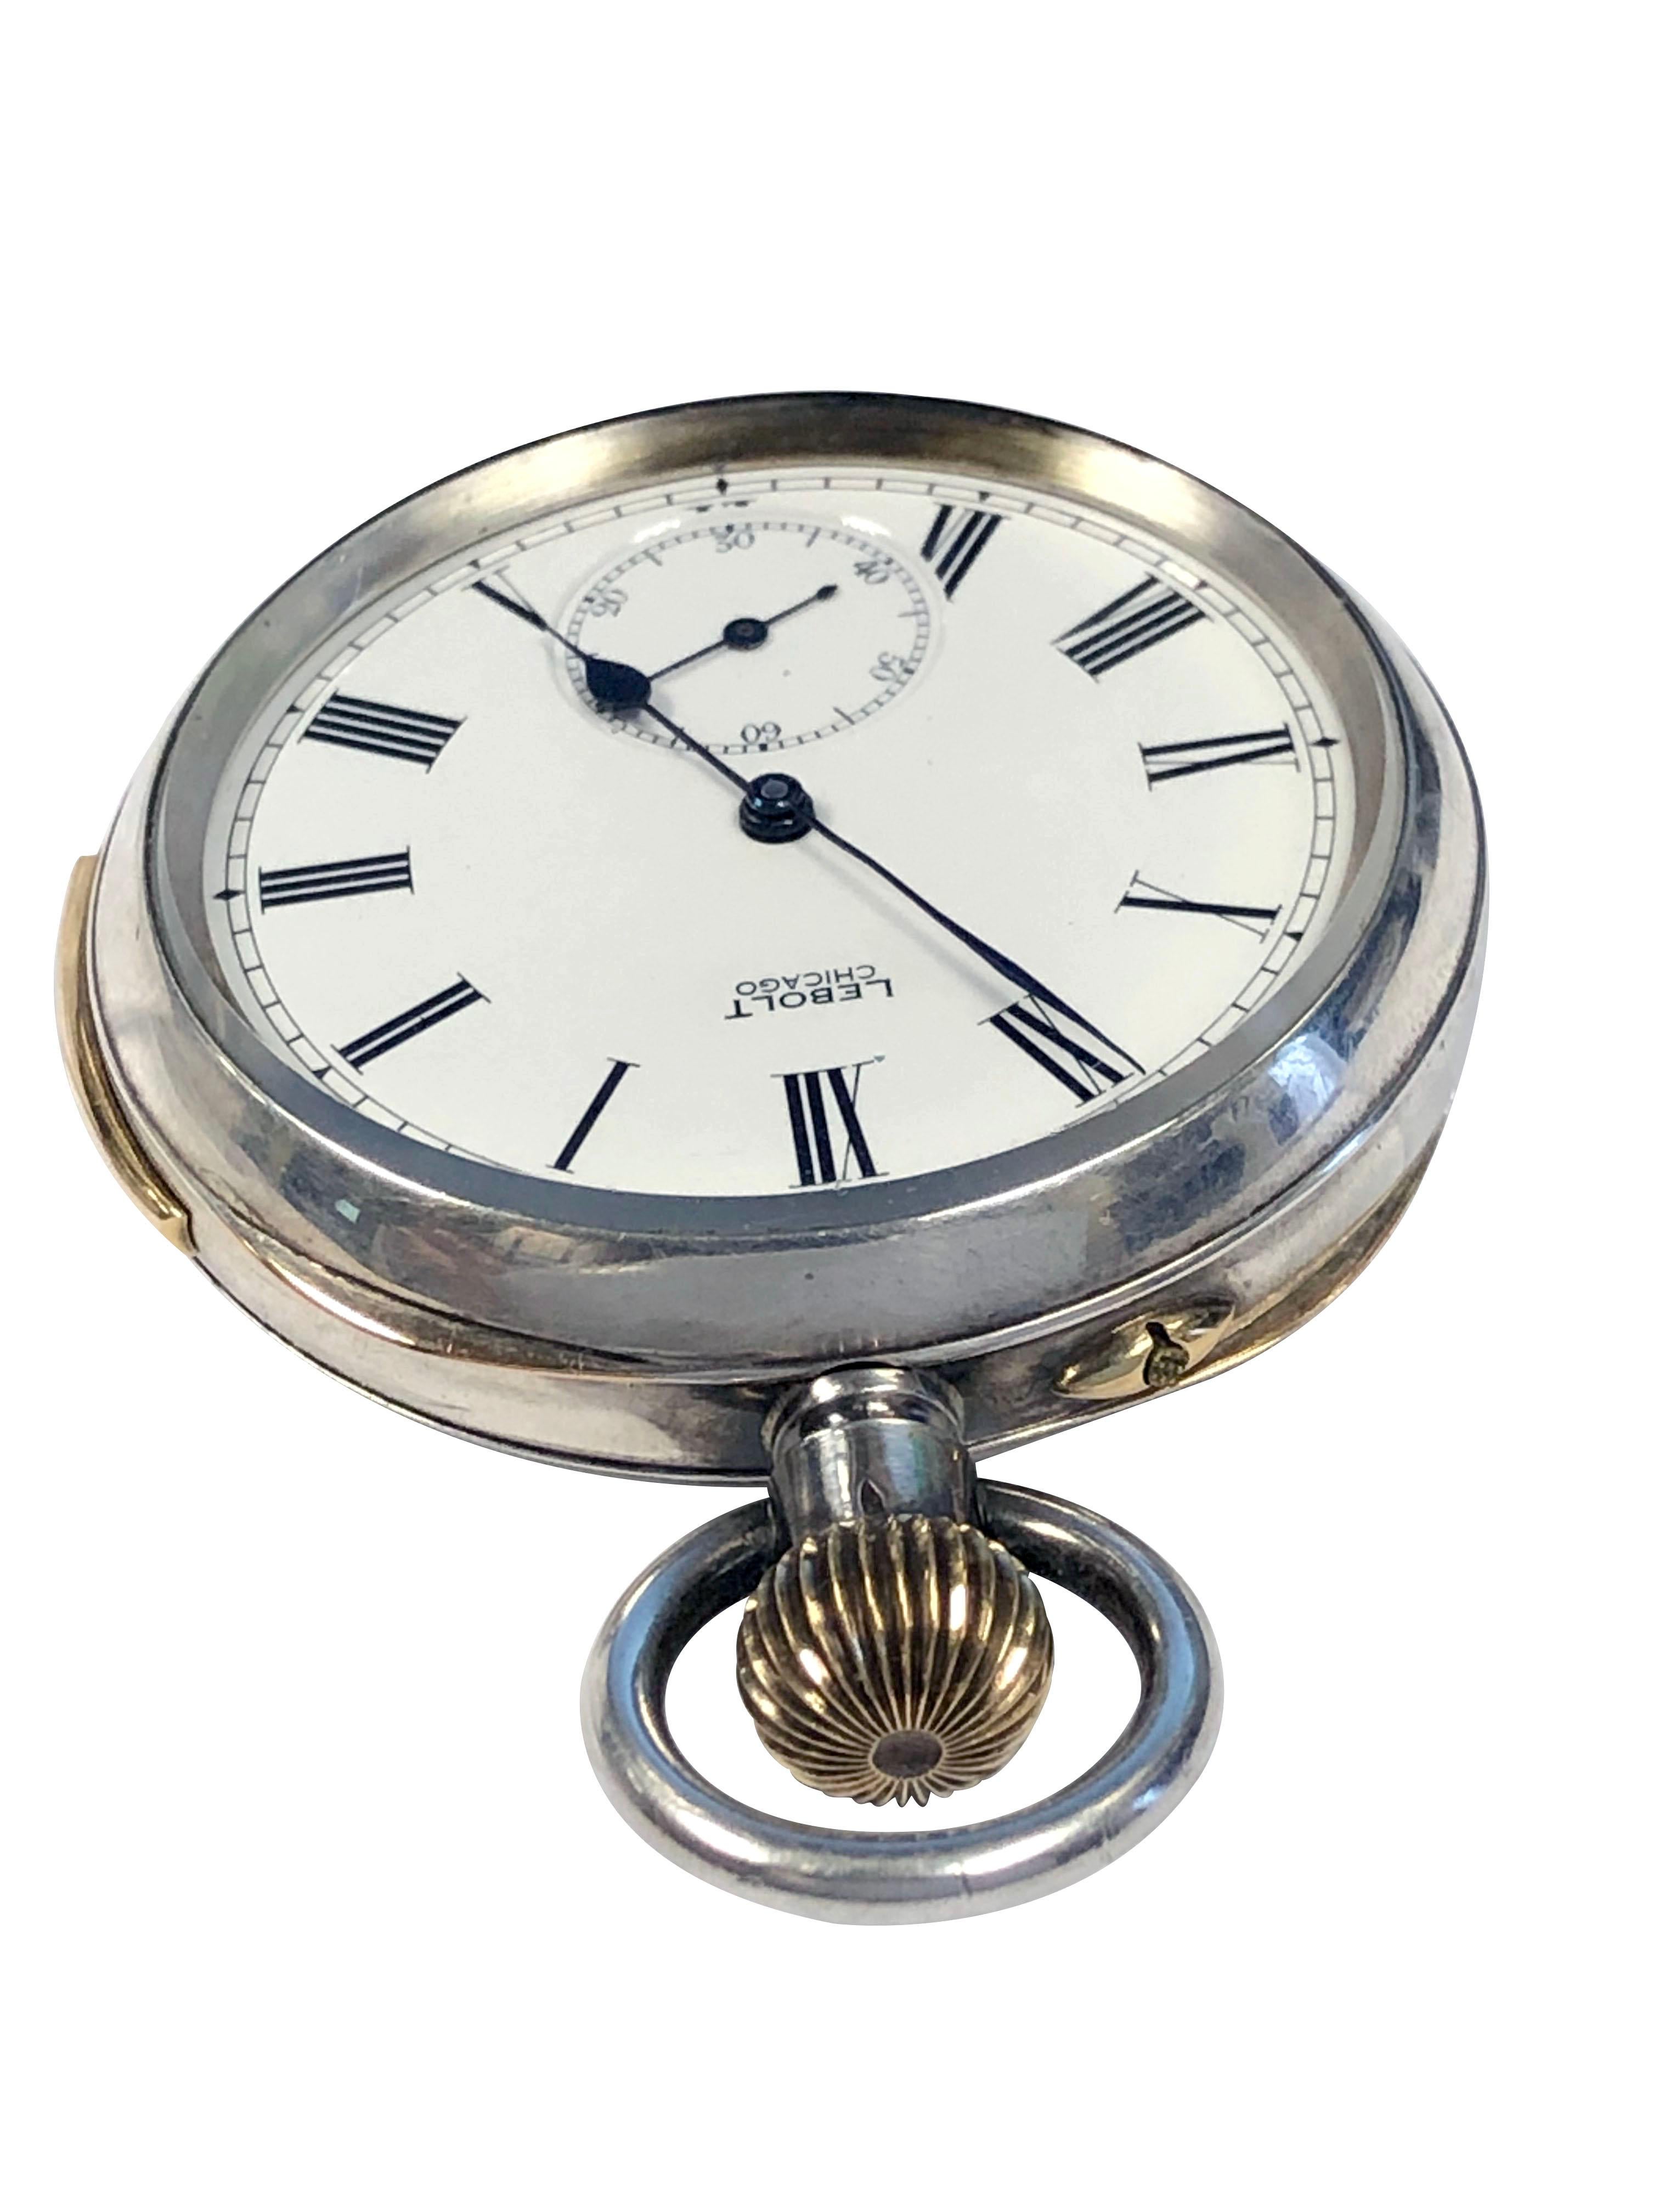 Circa 1900 Open Face Pocket Watch, 52 M.M. .935 Sterling Silver case with inside Sterling dust cover, Nickle and Gilt Plate Minute Repeater movement with slide operation by Stauffer & Company of Switzerland, who sourced many of their movements from